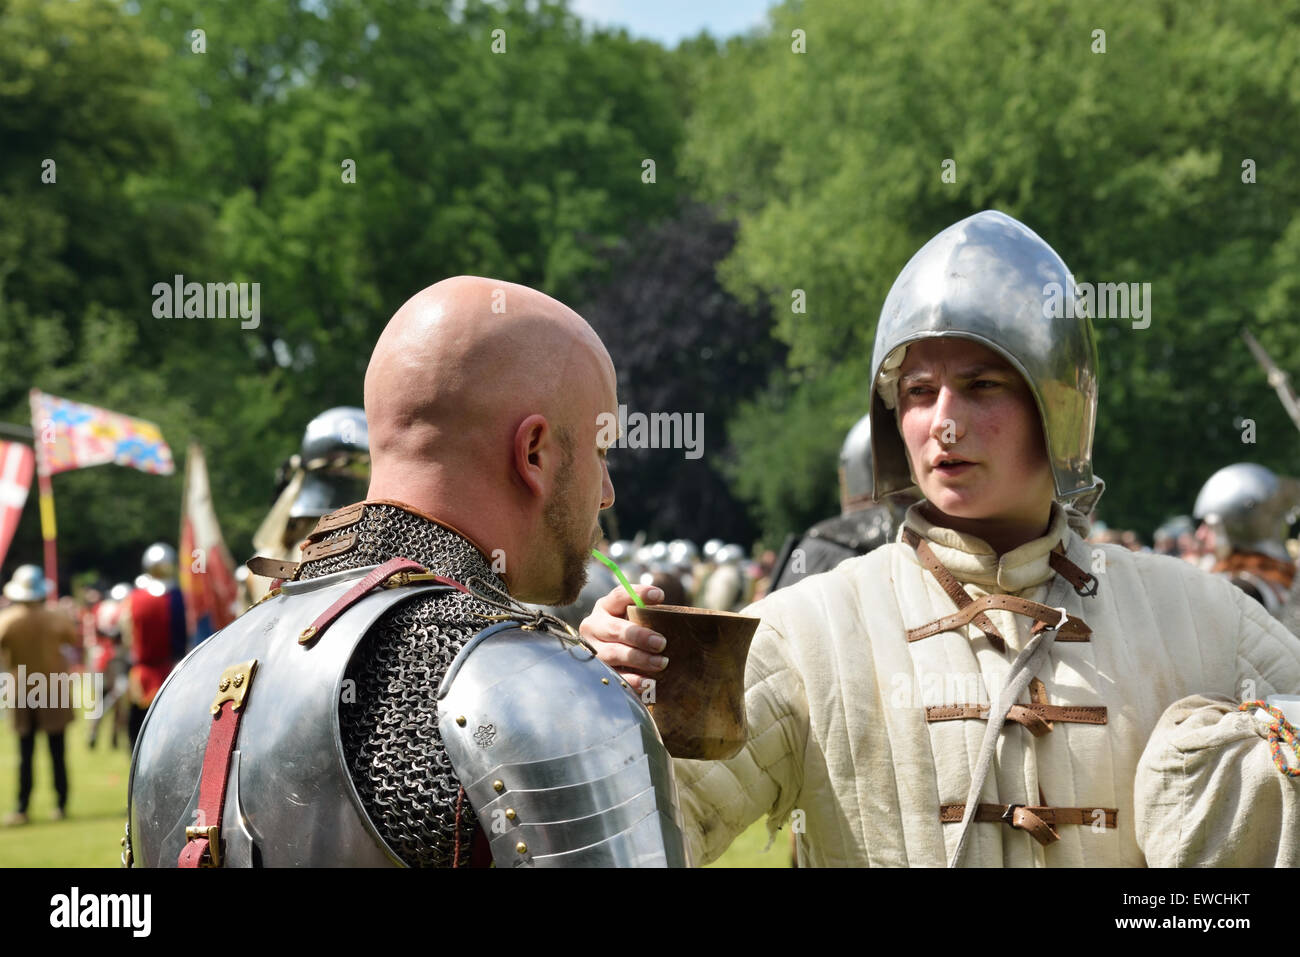 DEURNE, BELGIUM-JUNE 13, 2015: Participant of reconstruction of medieval battle of 1477 drinks water during battle Stock Photo